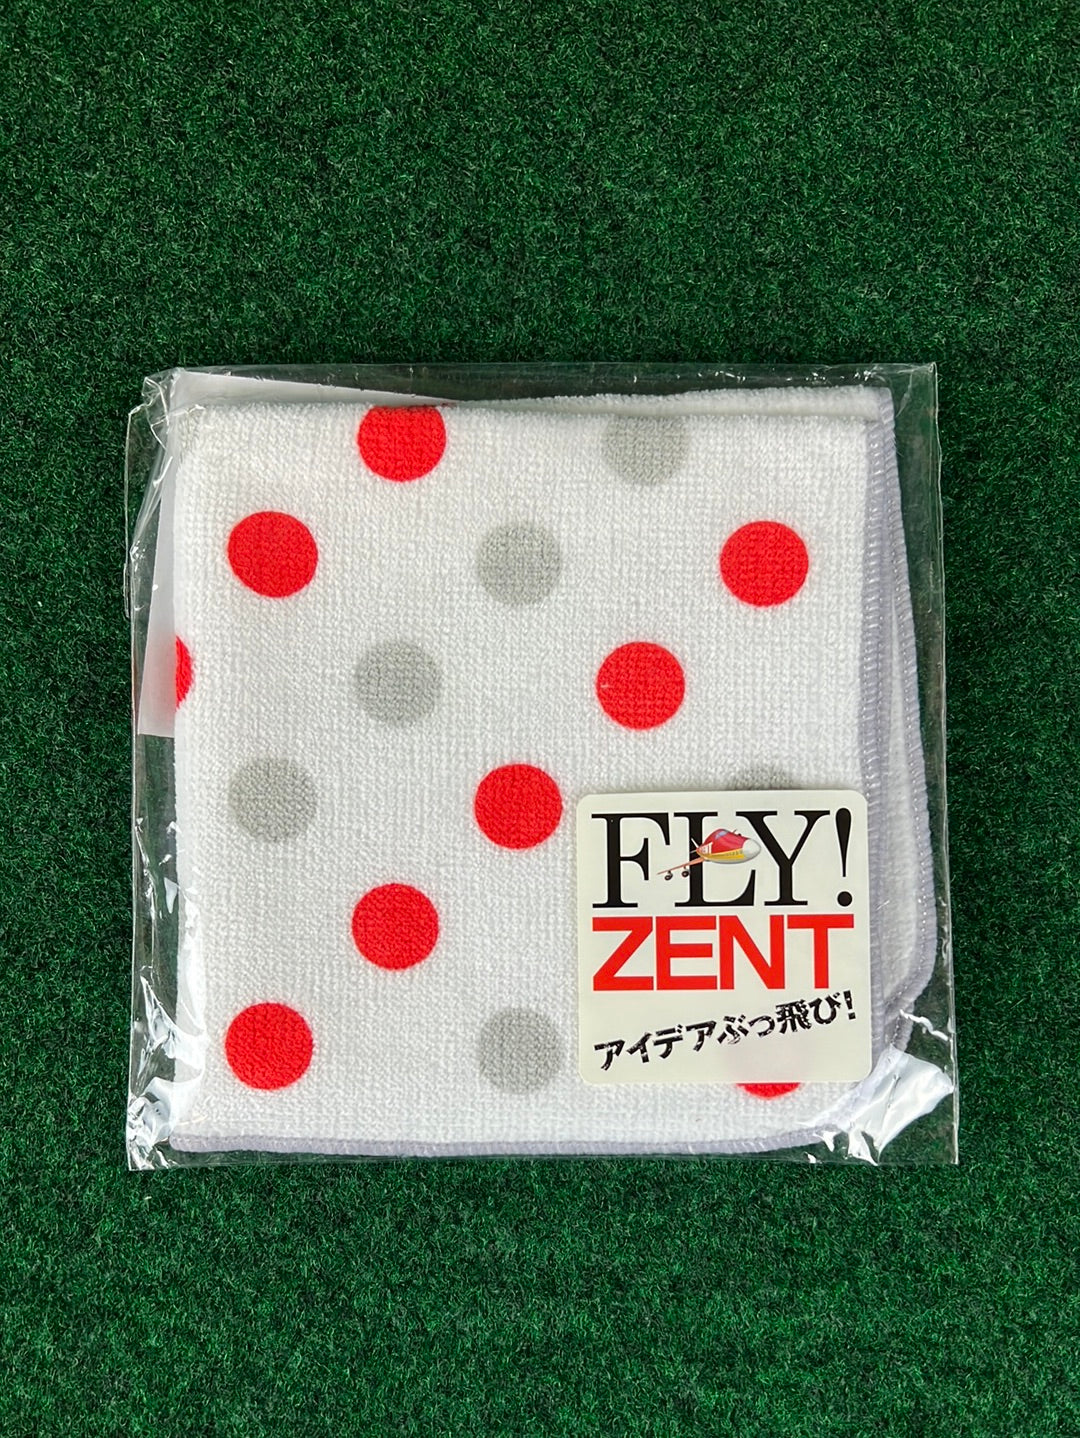 FLY! ZENT - Promotional Towel